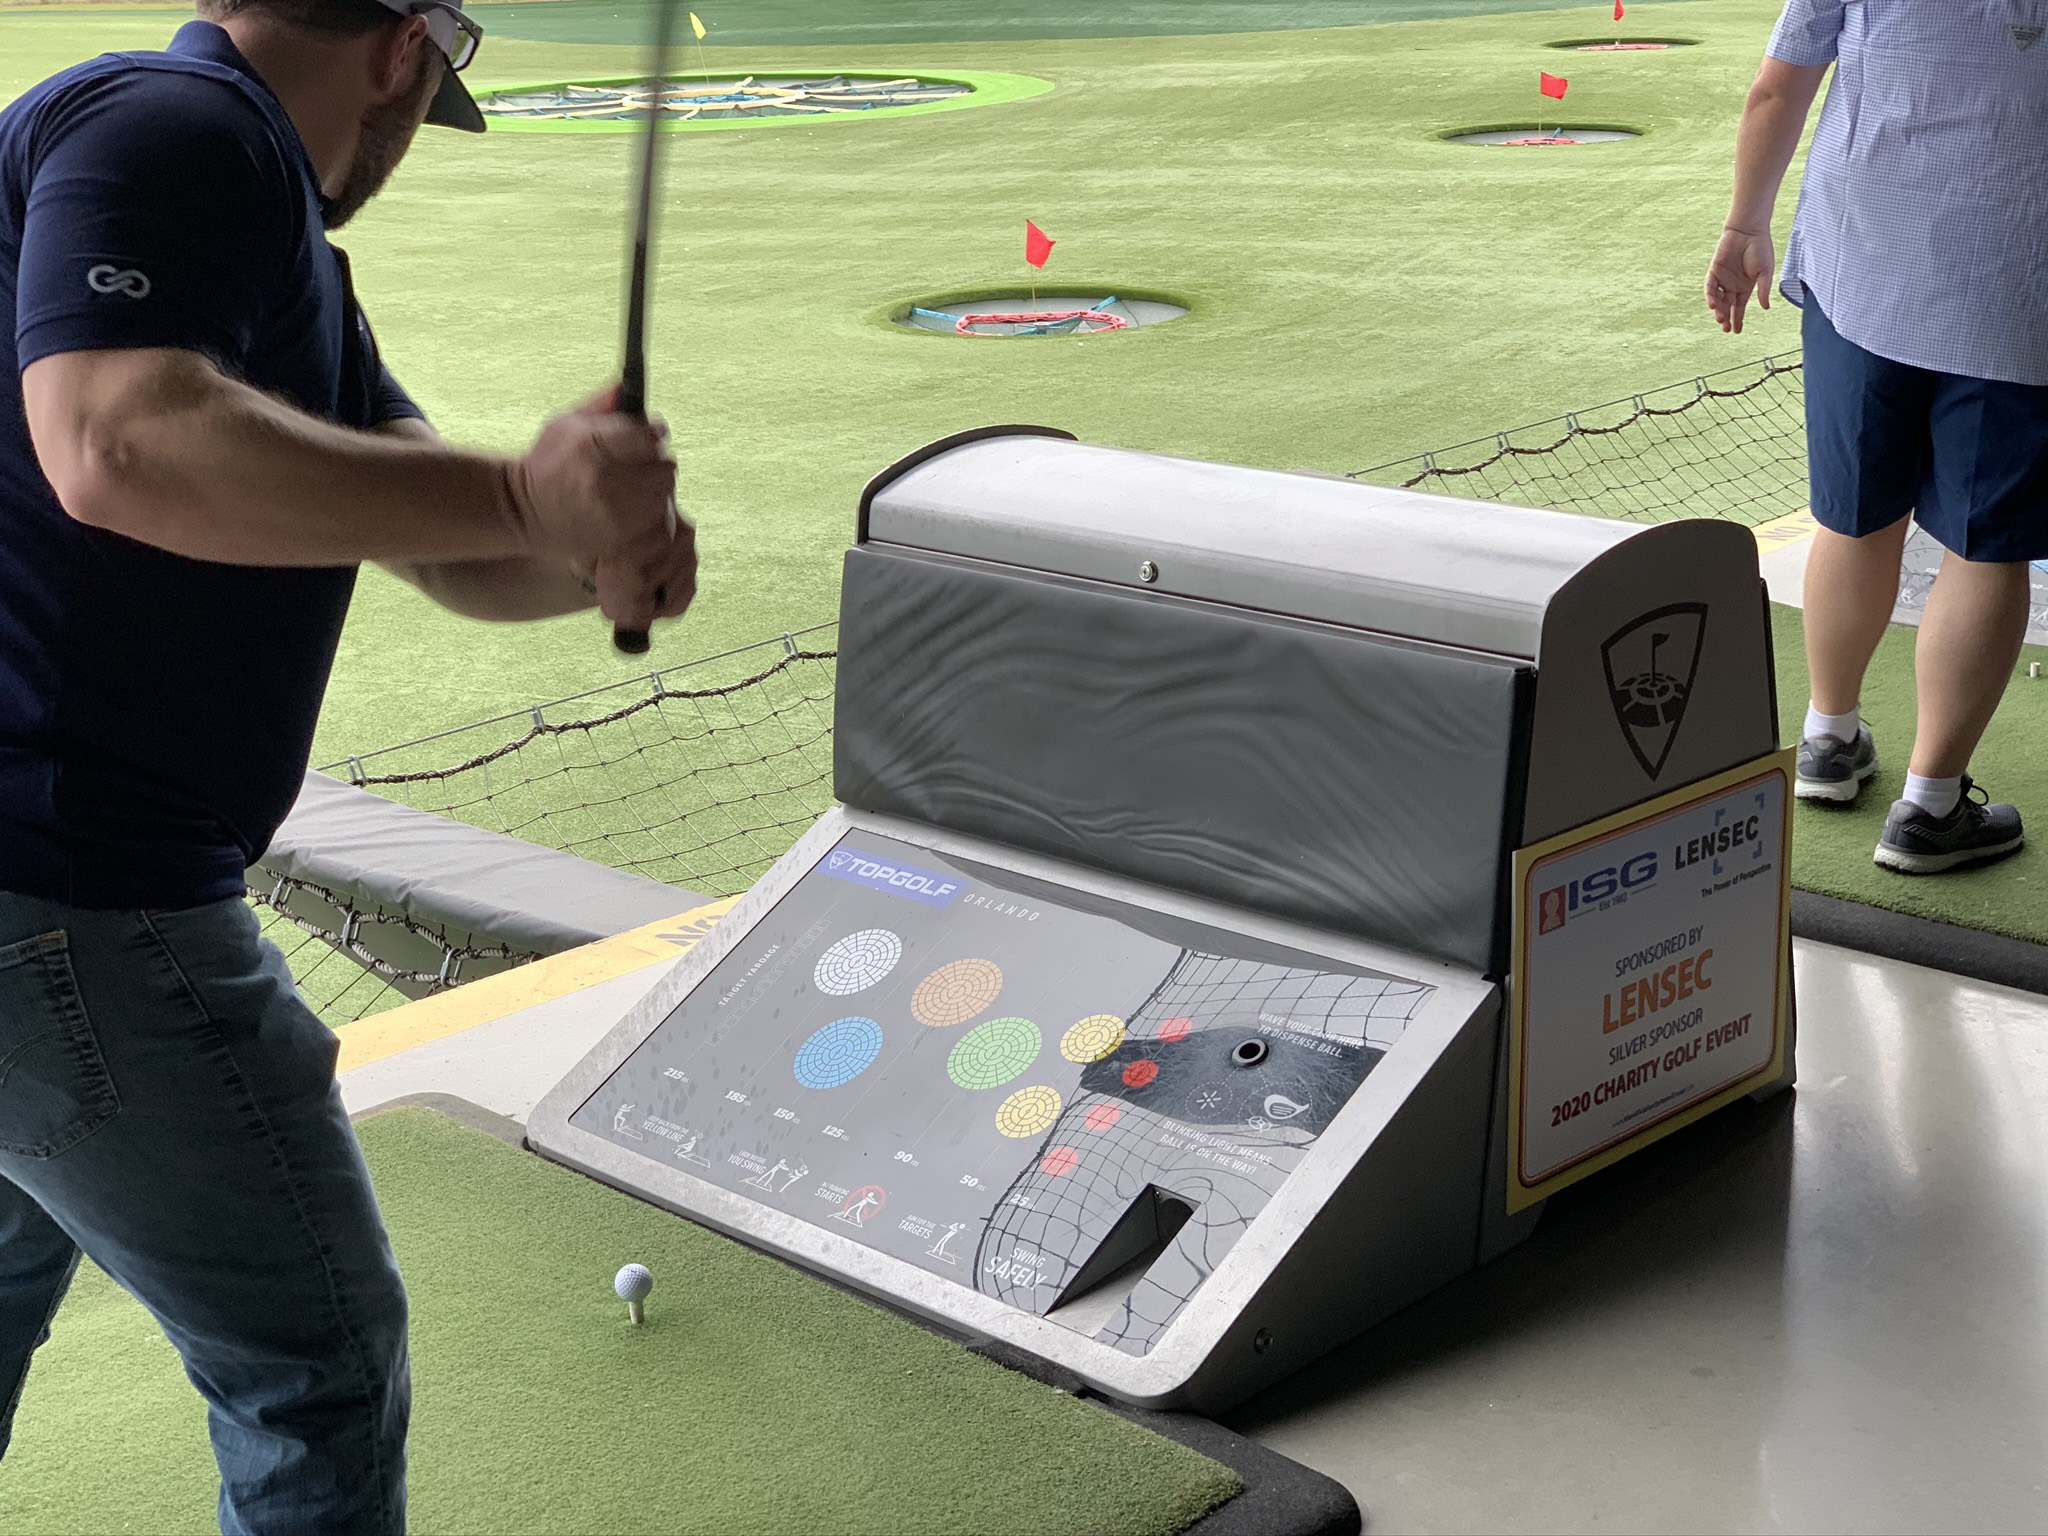 LENSEC Sponsors a Top Golf tournament for charity